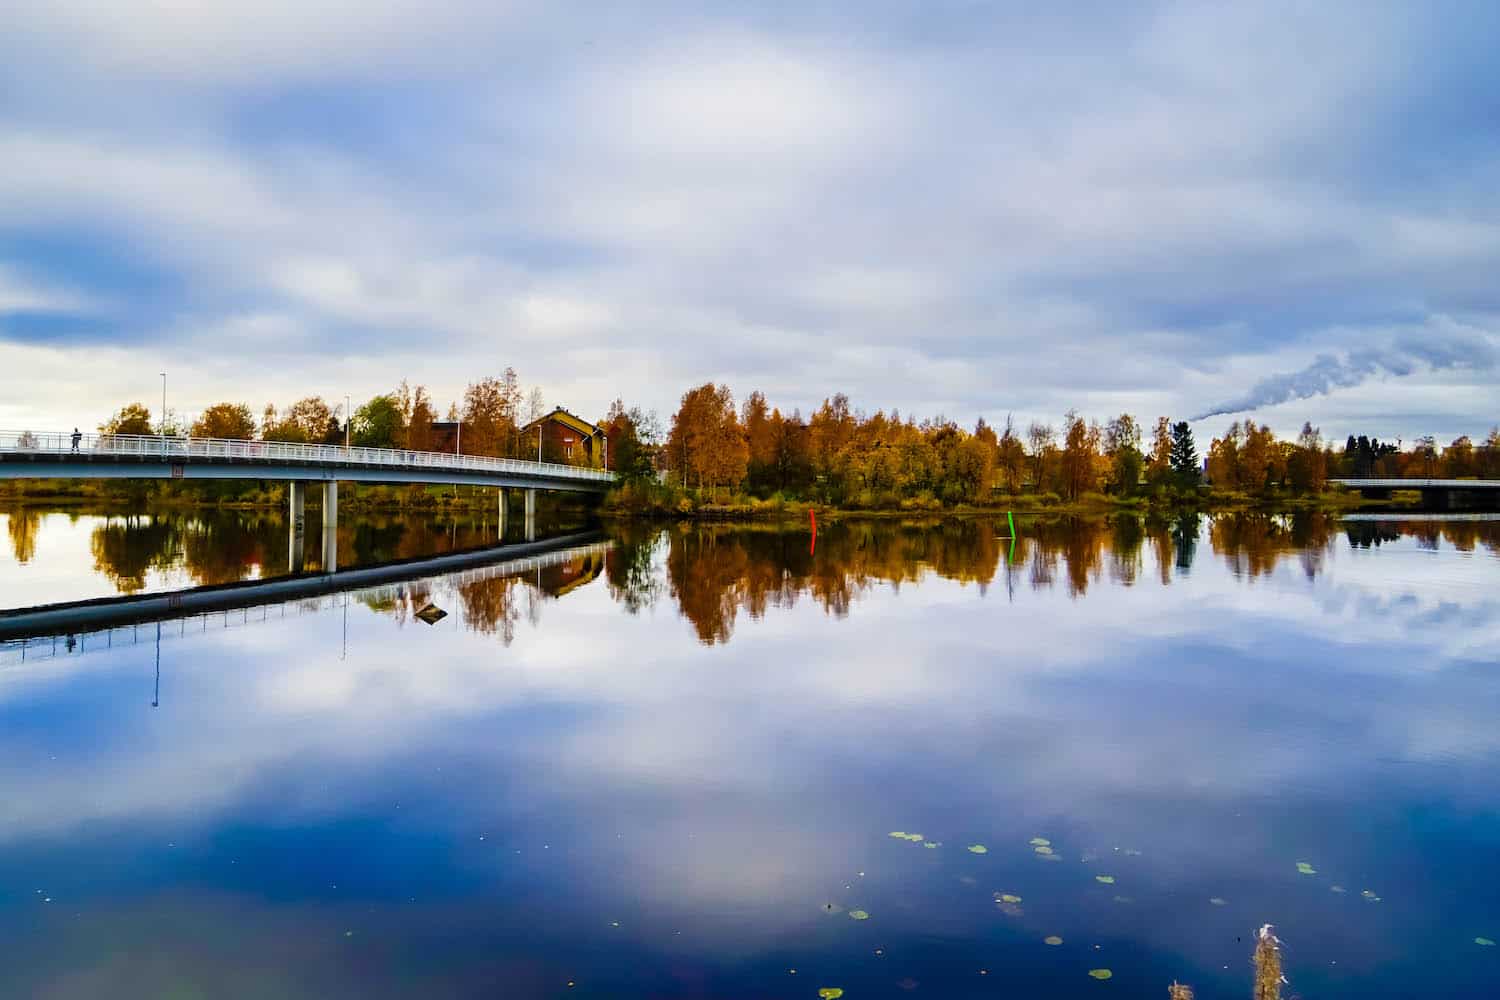 15 Fun Things To Do In Oulu: Northern Peace Meets Coastal Finland